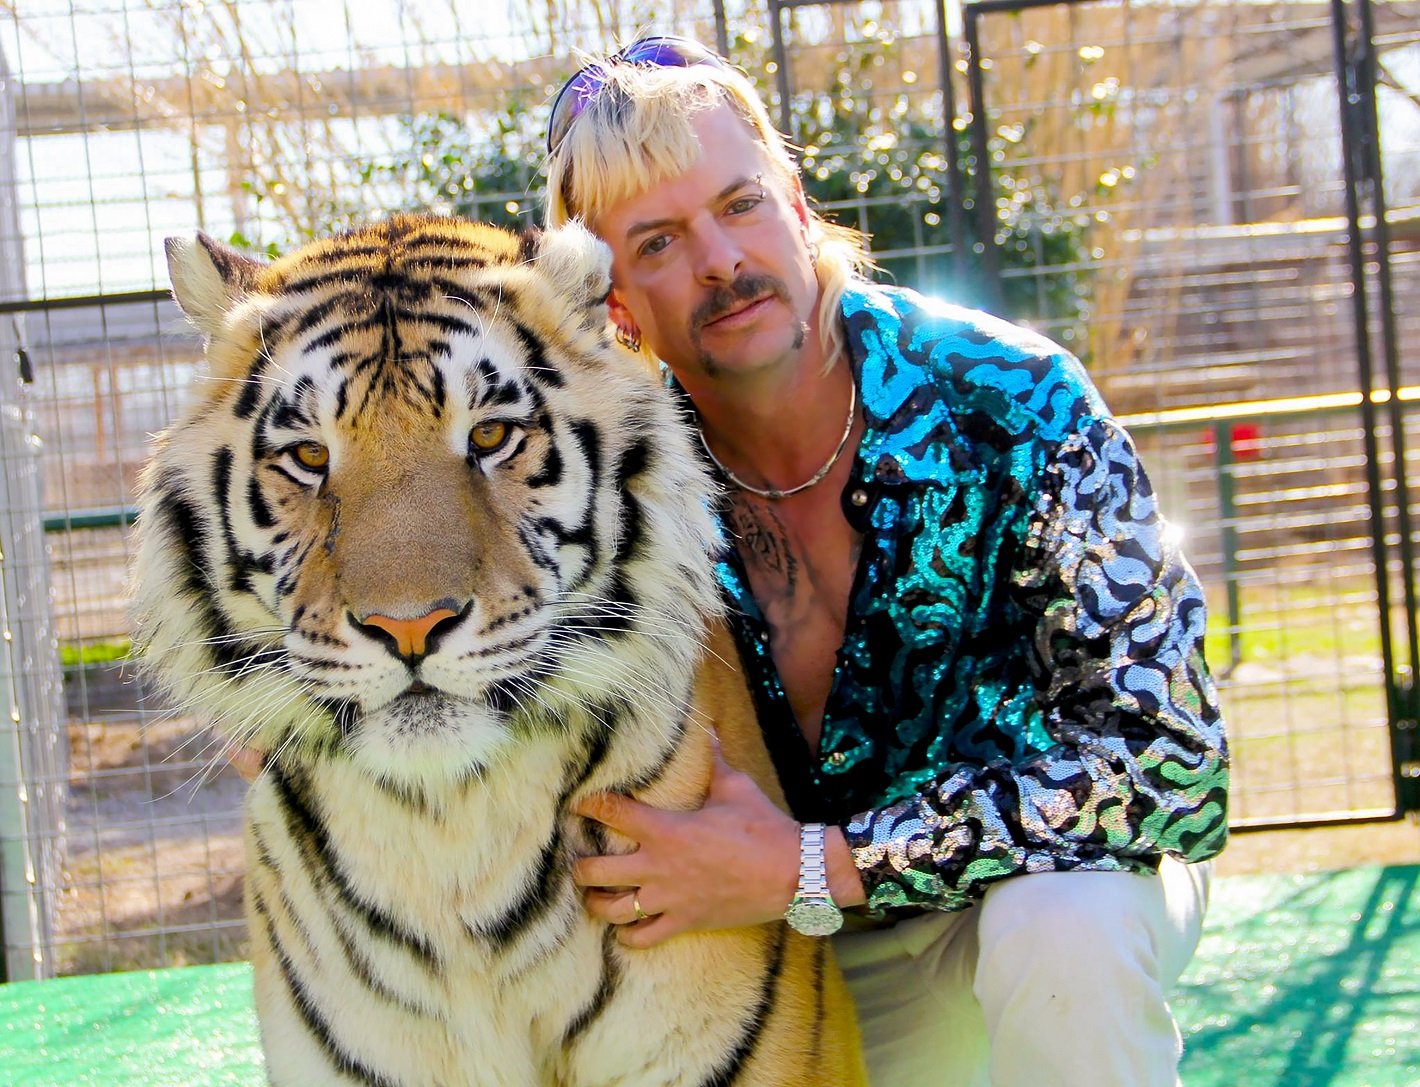 Joe Exotic poses with a tiger in 'Tiger King'